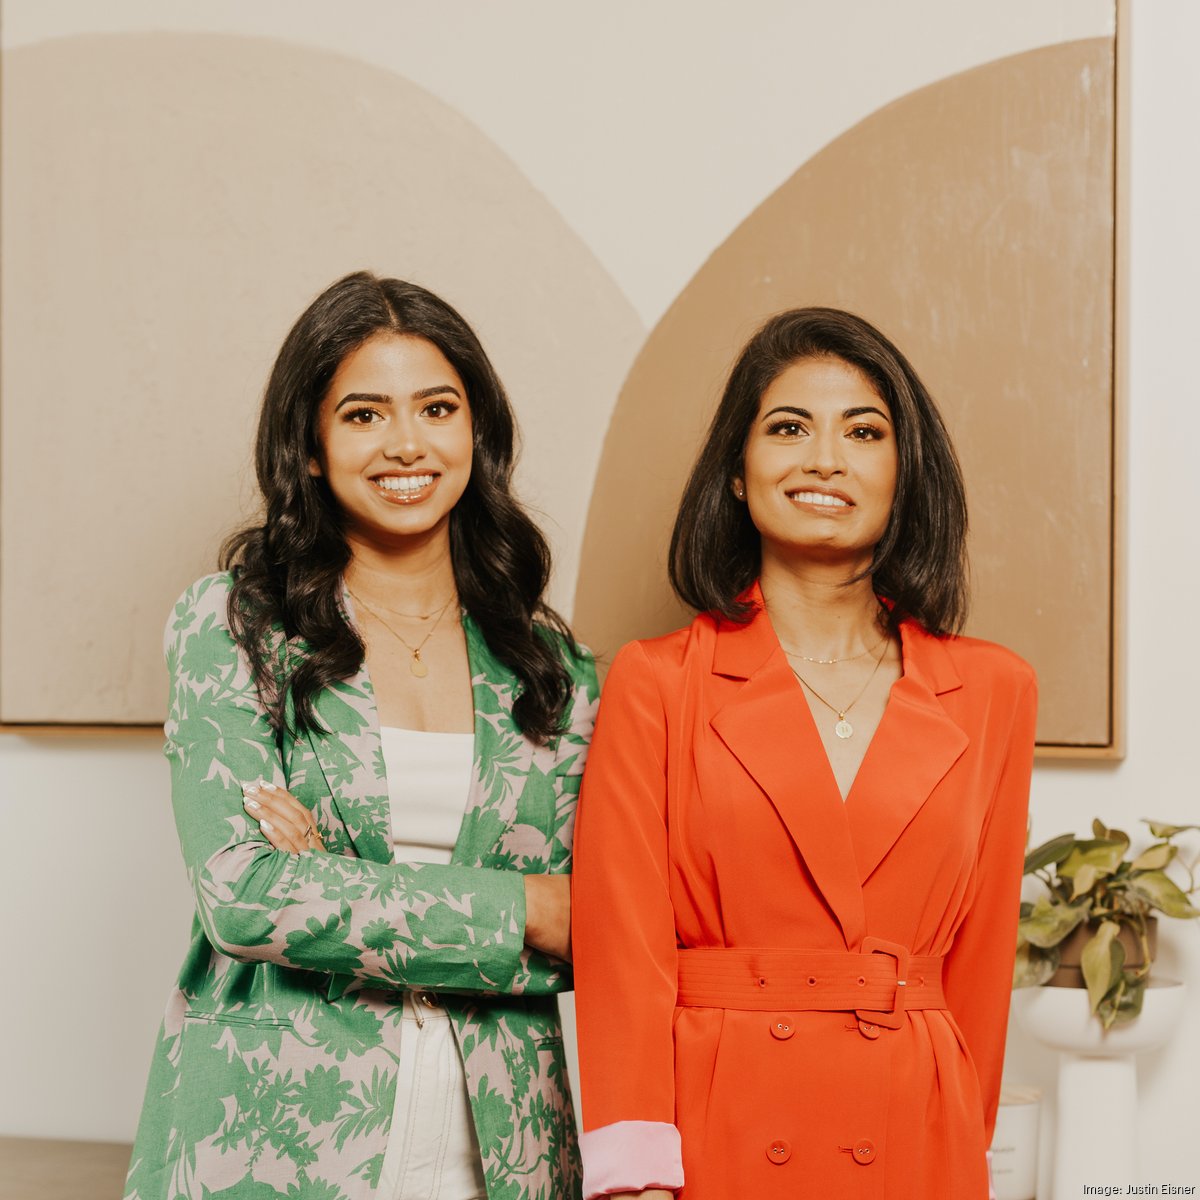 Triangle Inno - Fashion startup lands Nordstrom deal with help from TikTok